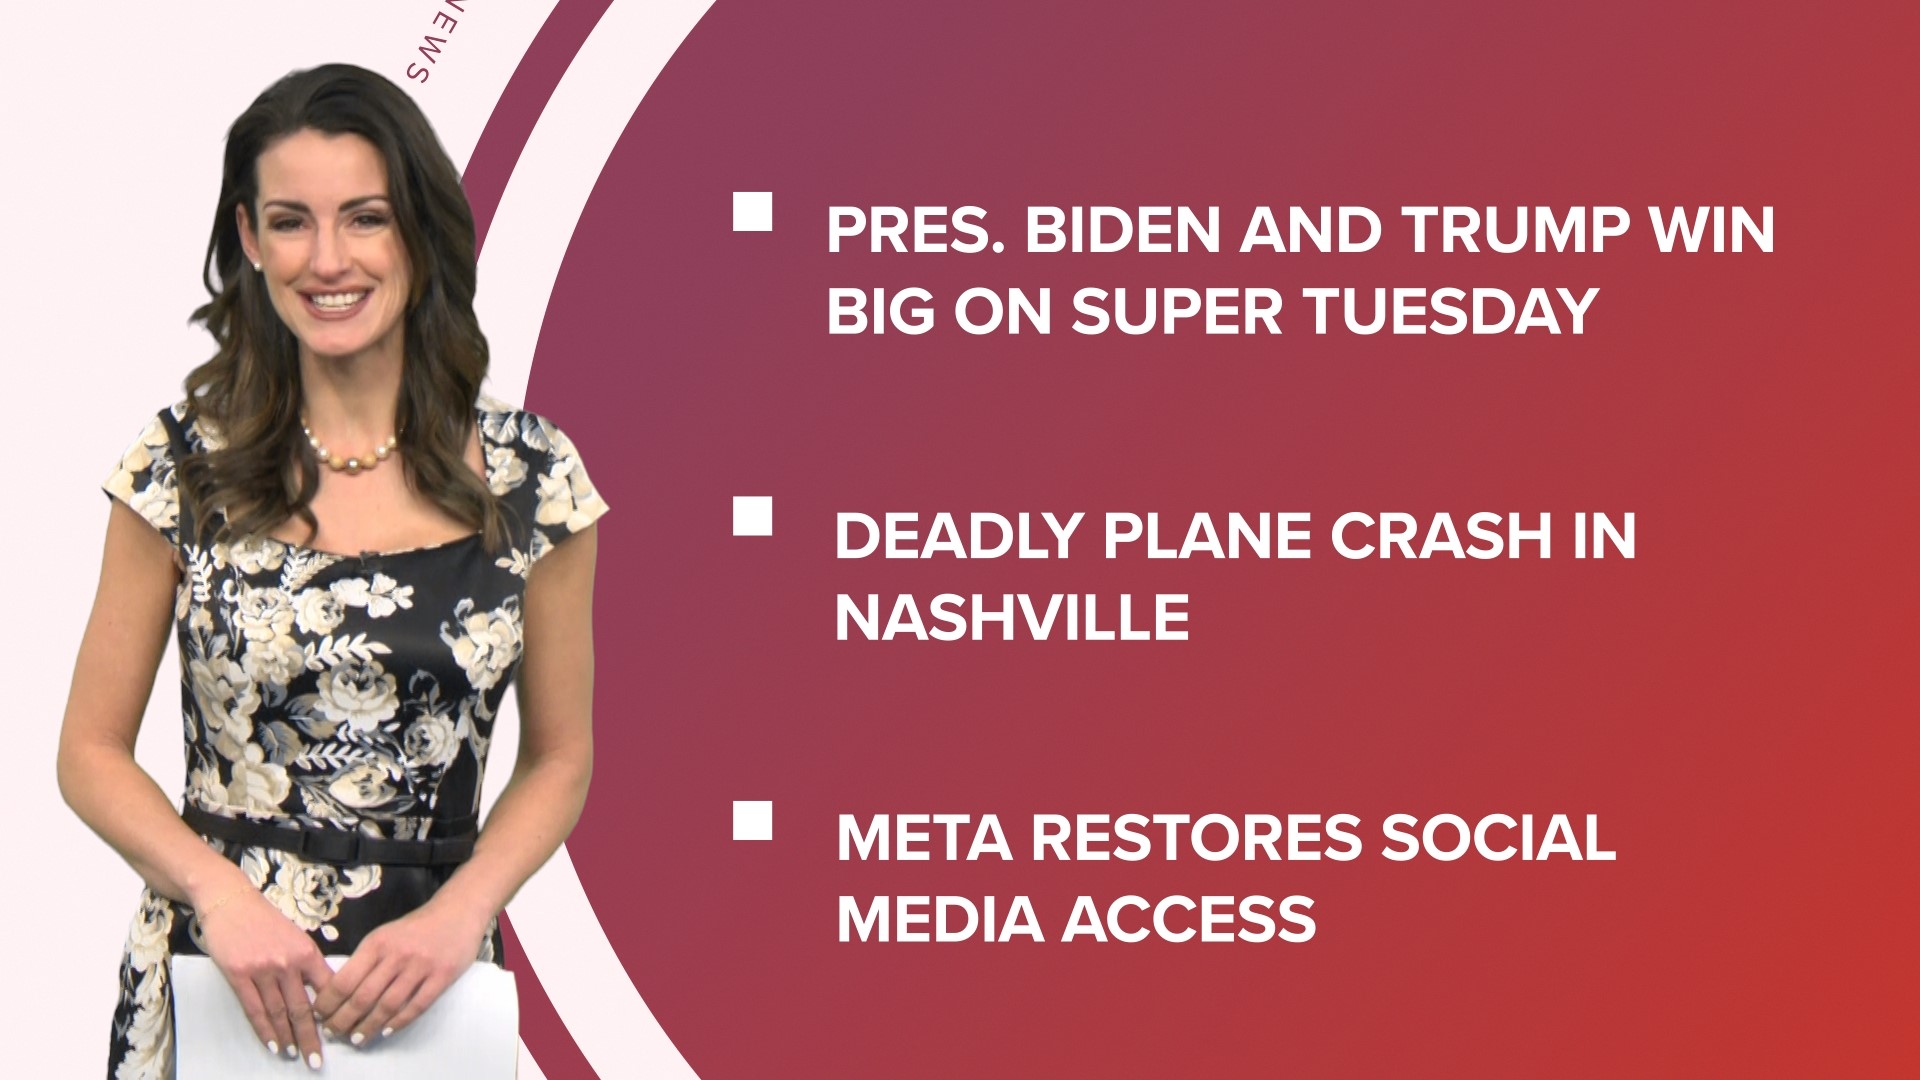 A look at what is happening in the news from Nikki Haley suspending her campaign after Super Tuesday to credit cards fees and avoiding spring break travel scams.